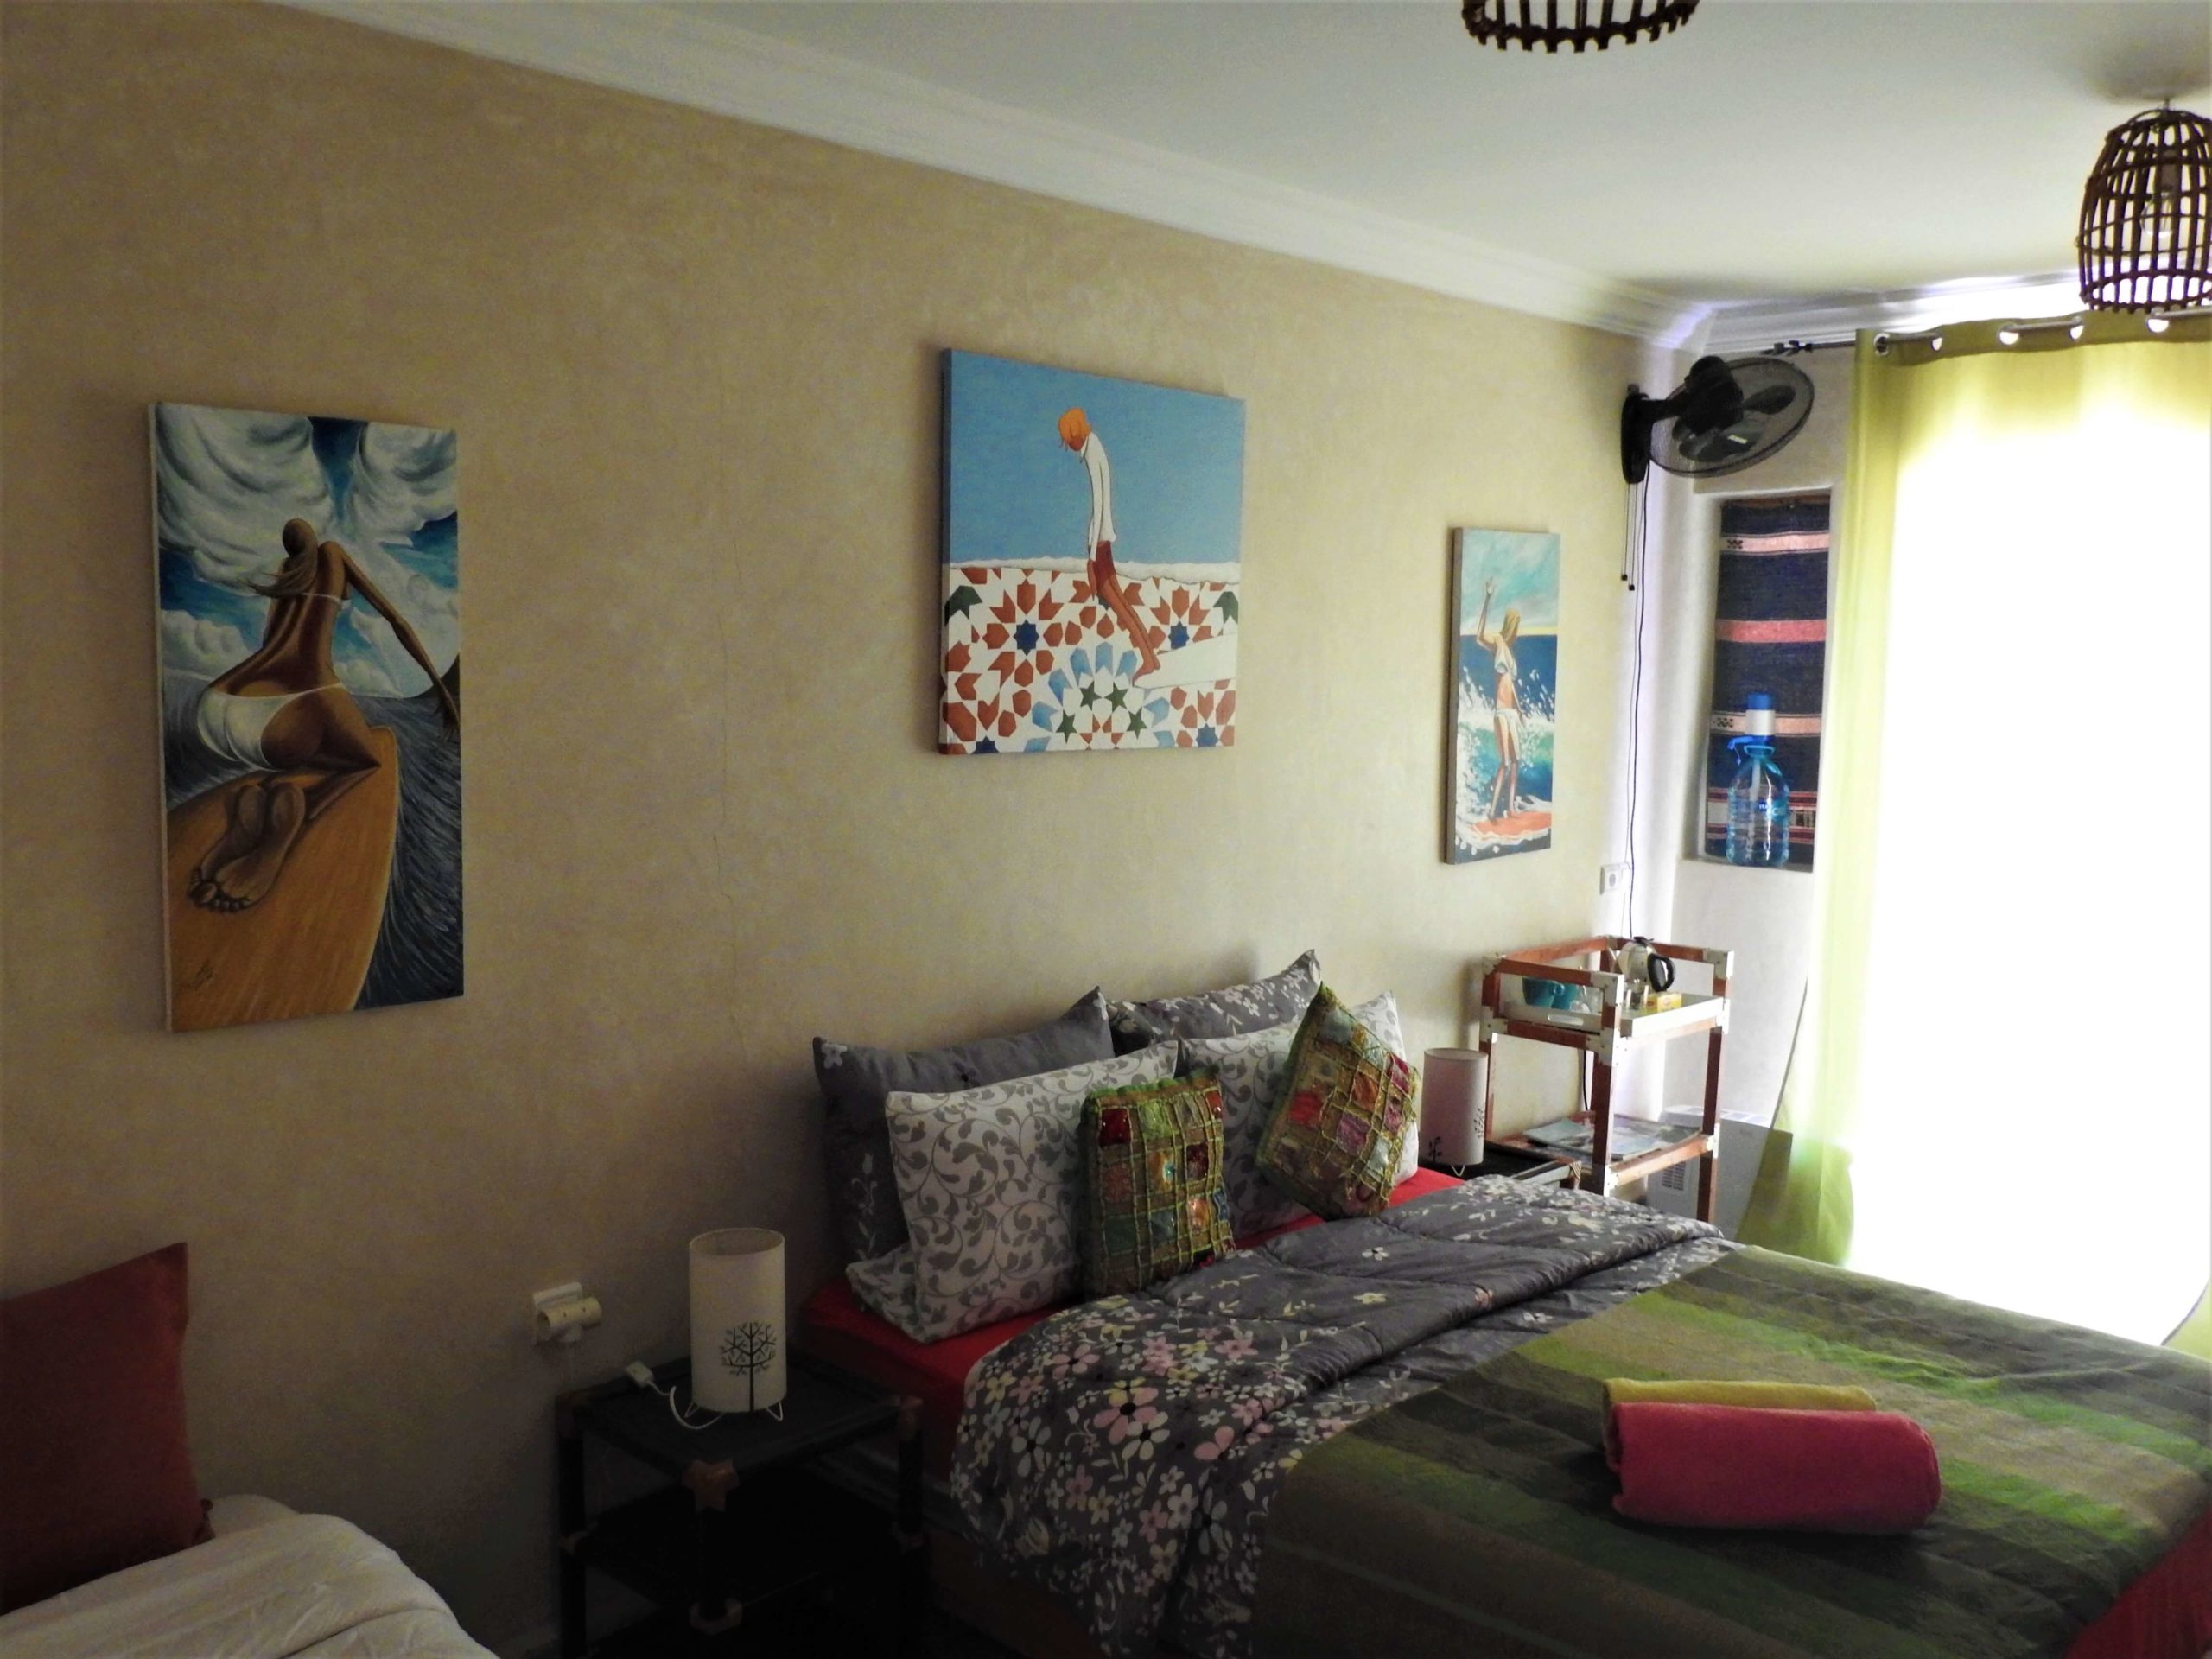 Chambres Individuelles - FREE SURF MAROC